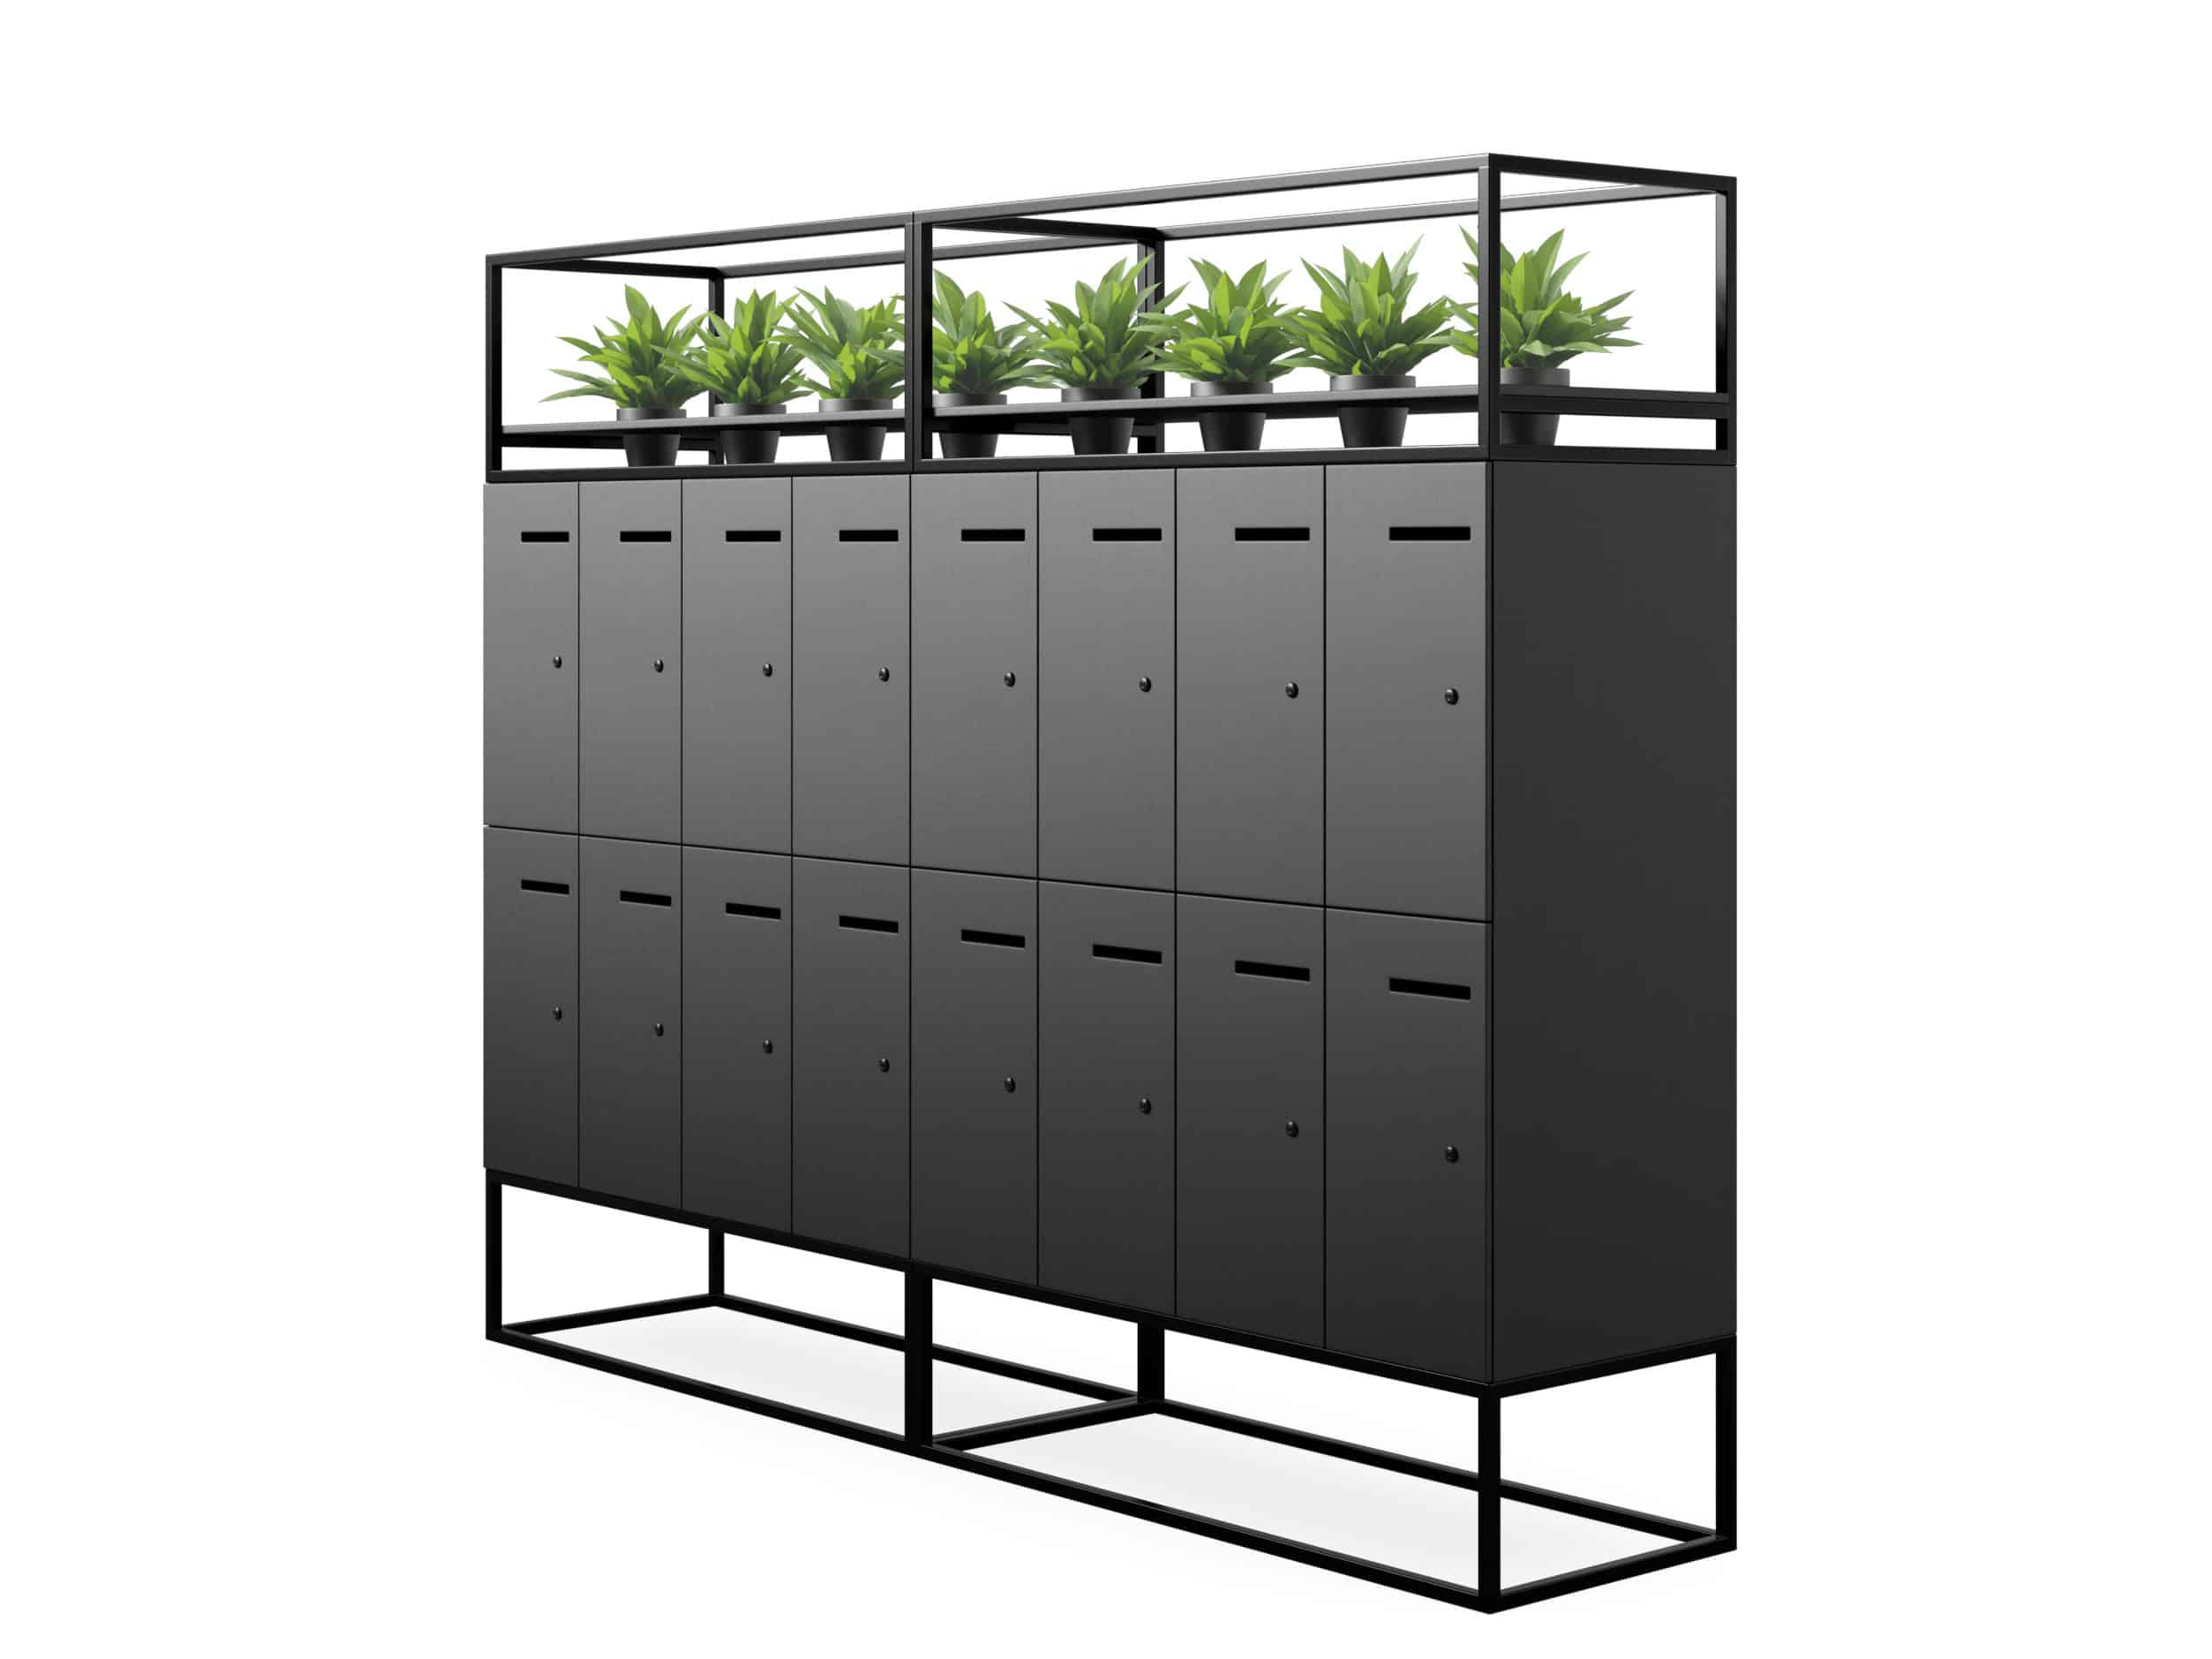 Black metal office lockers with planter box on top